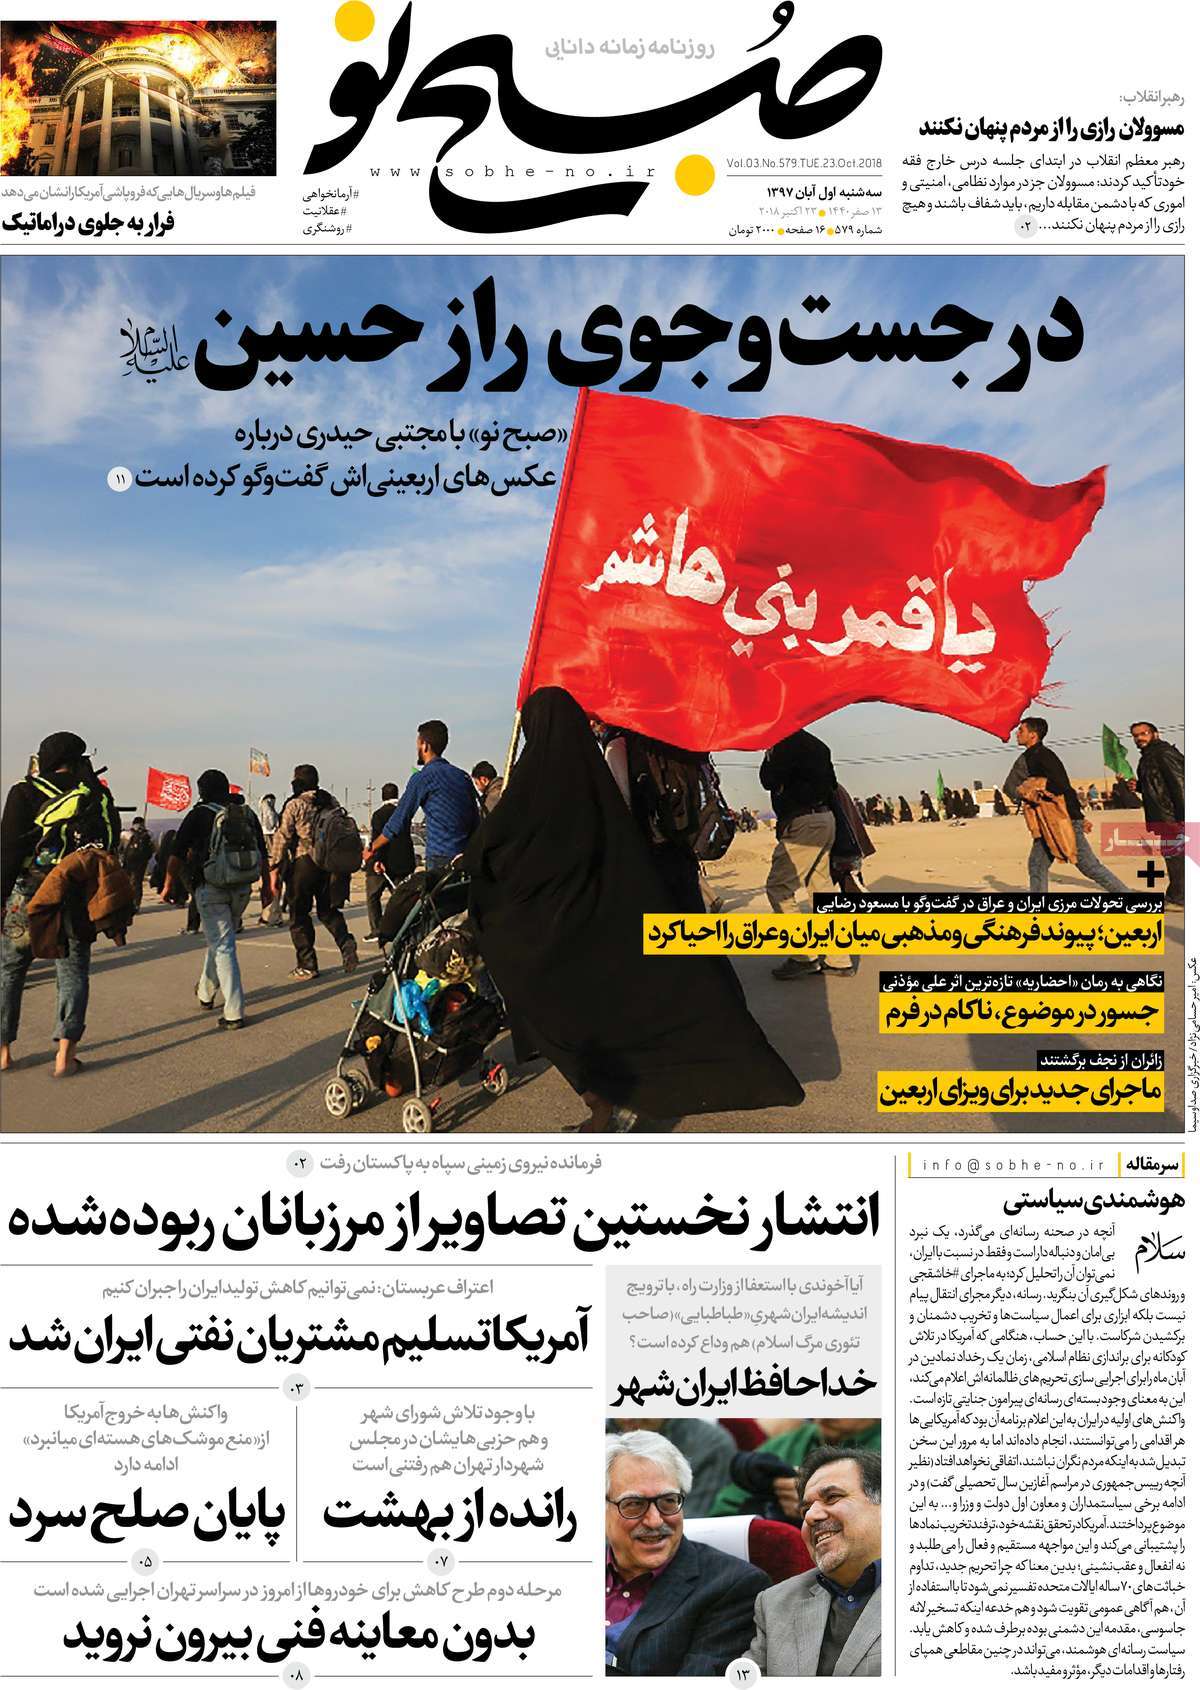 A Look at Iranian Newspaper Front Pages on October 23